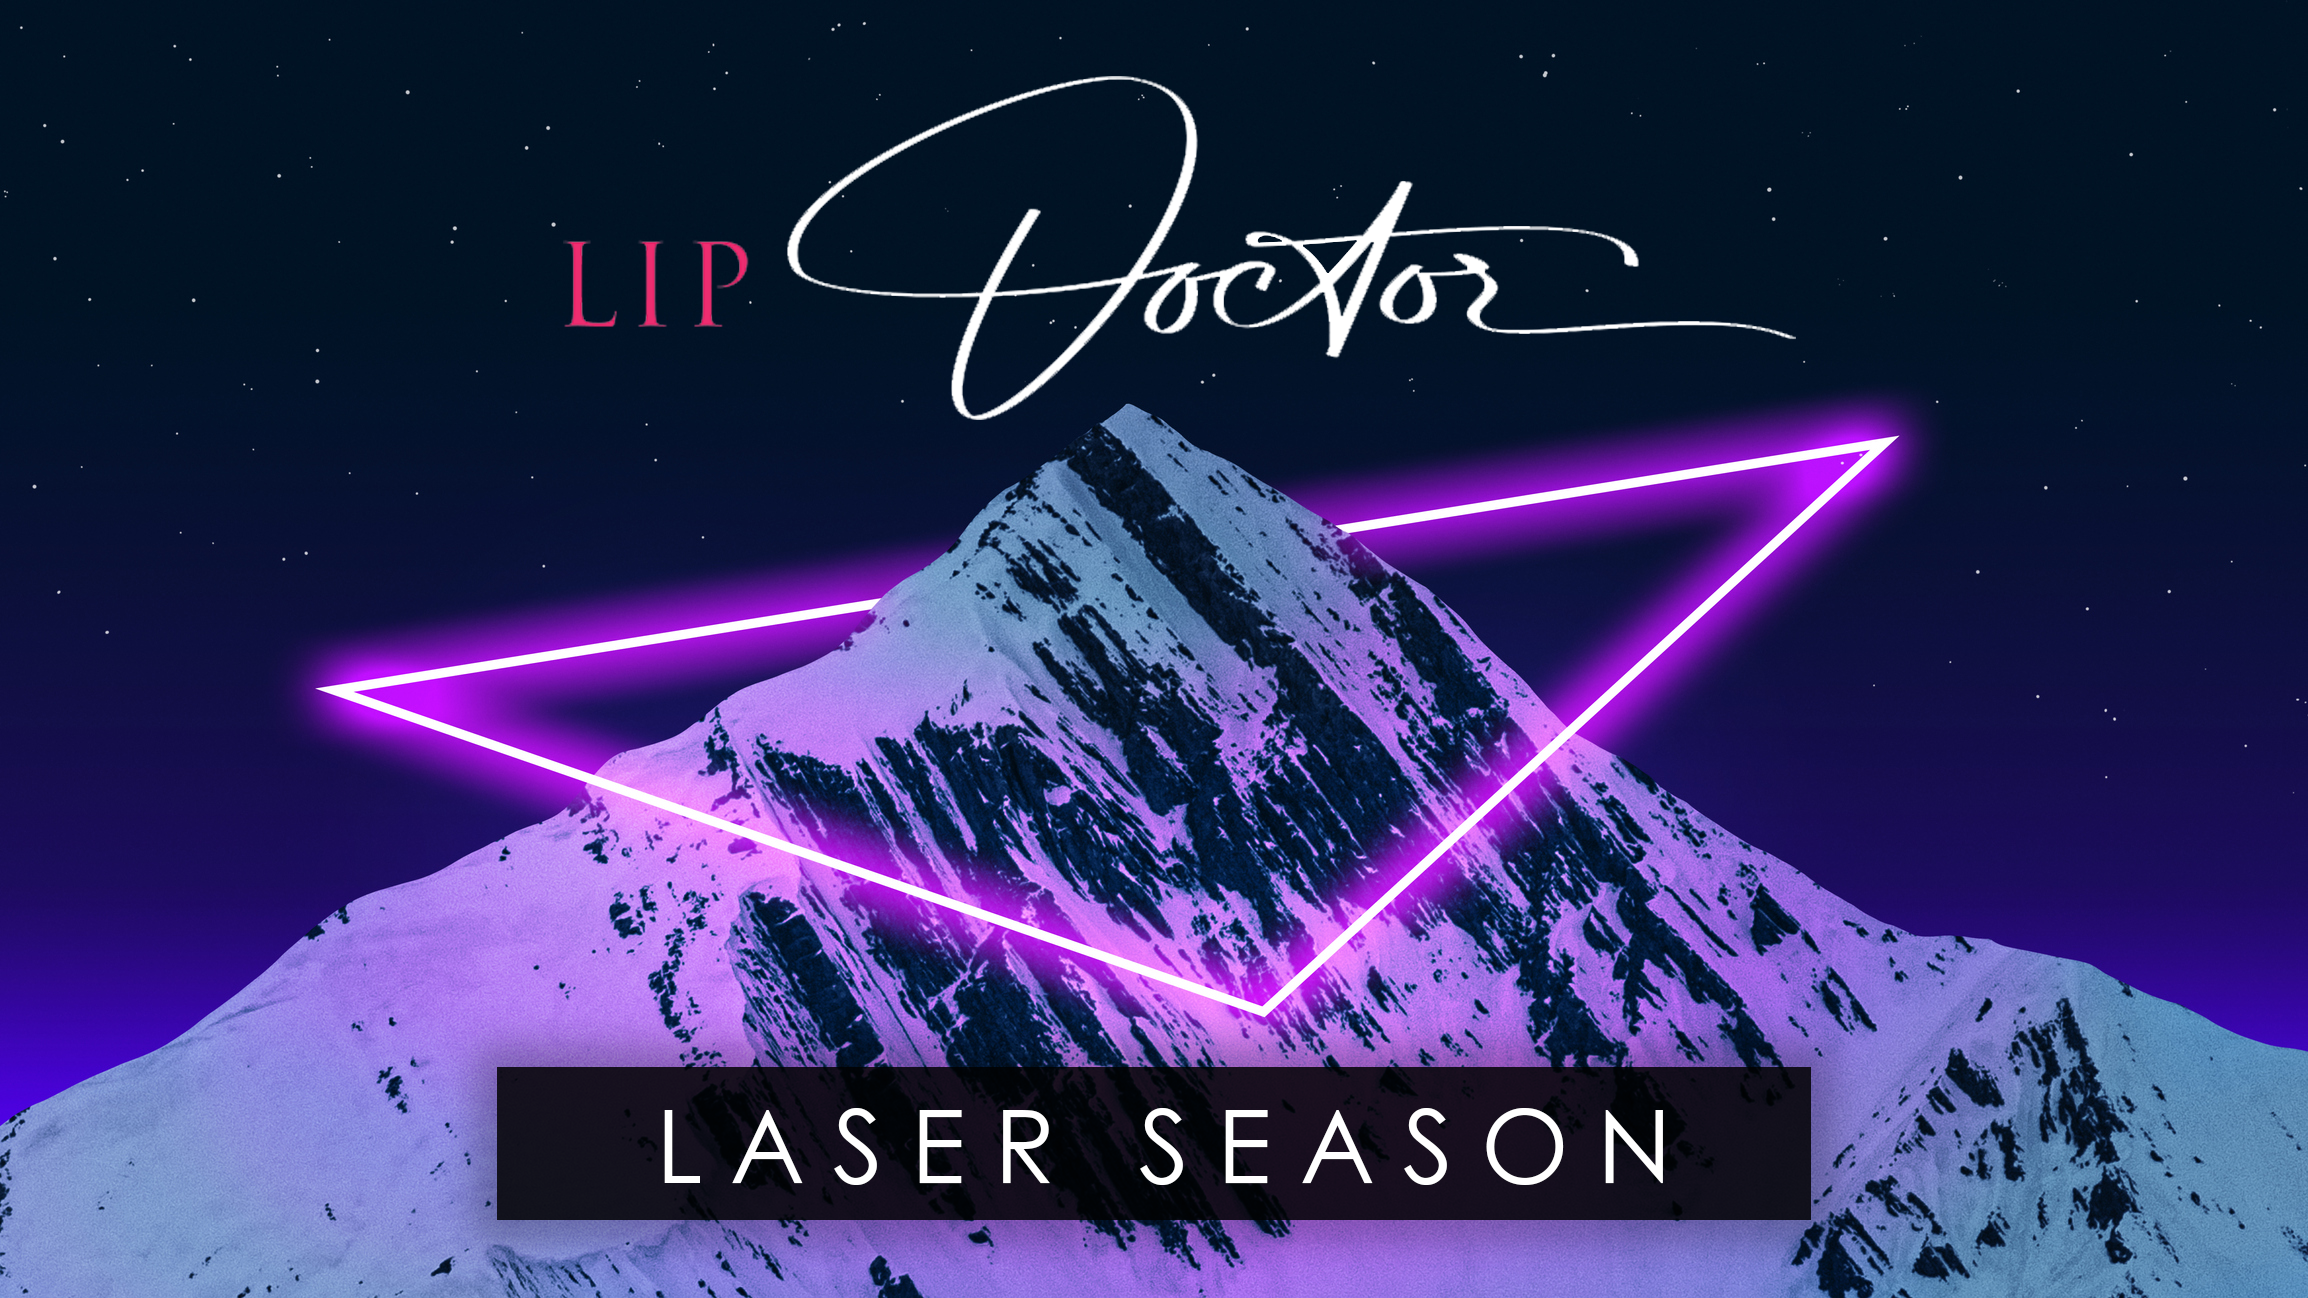 Laser treatment devices at The Lip Doctor clinic during laser season, showcasing advanced skin rejuvenation technologies in Oakville and Mississauga